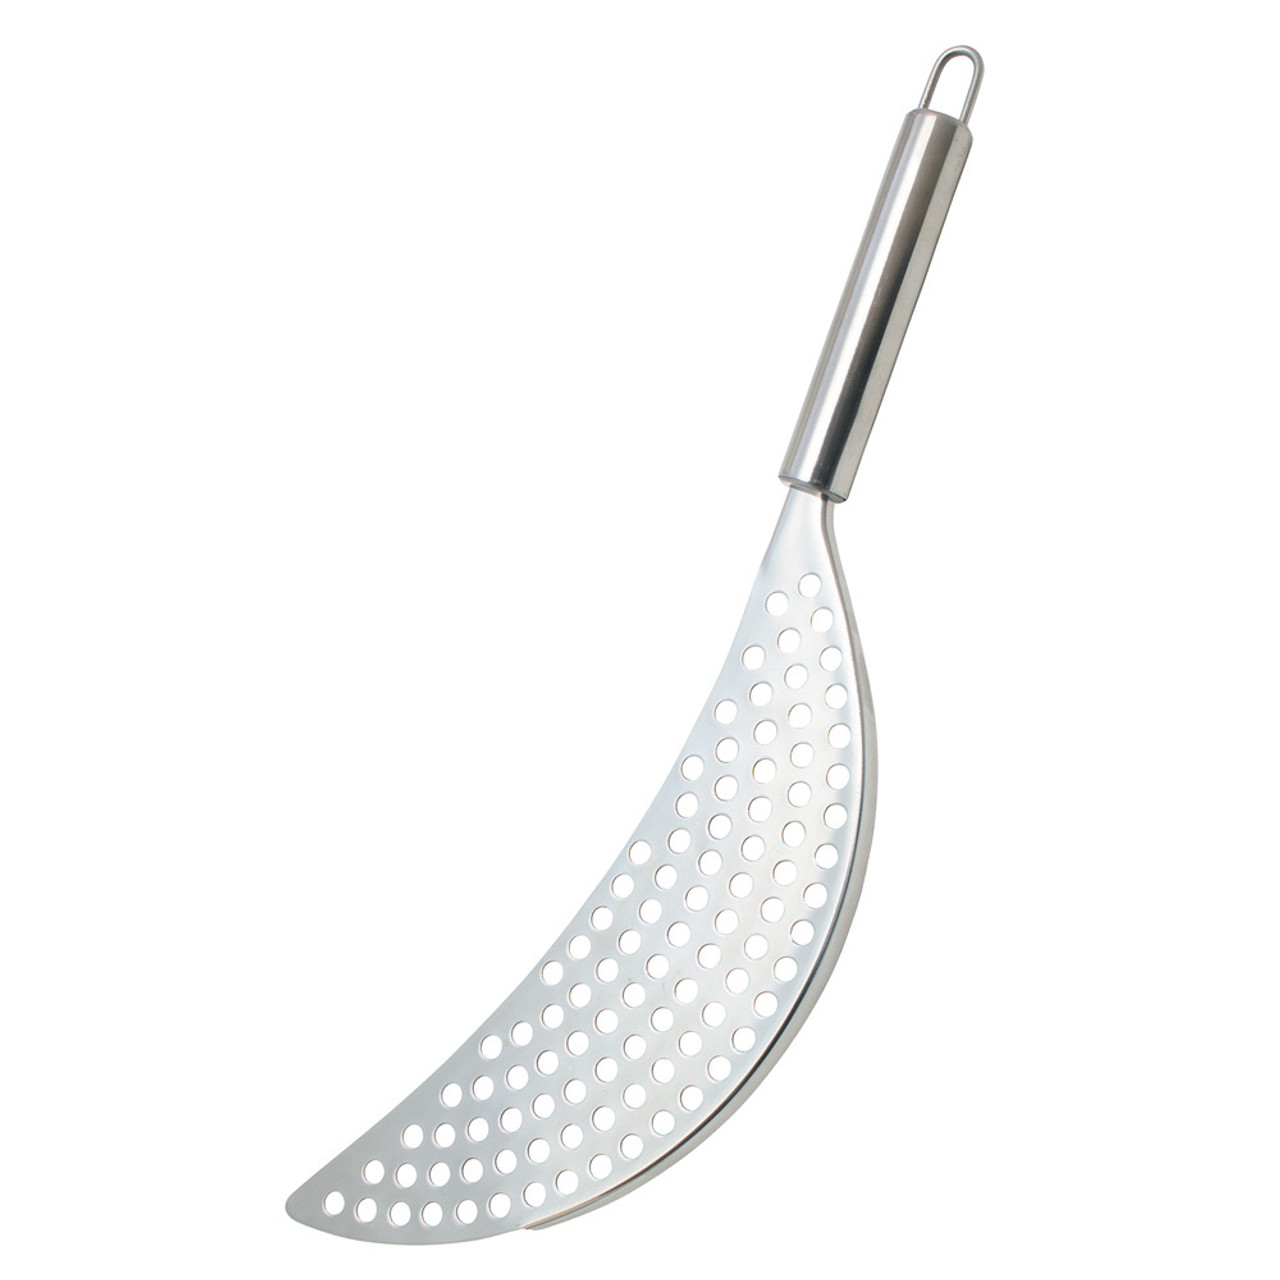 KitchenCraft Stainless Steel Crescent Shaped Pan Drainer RRP £14.99 CLEARANCE XL £7.99